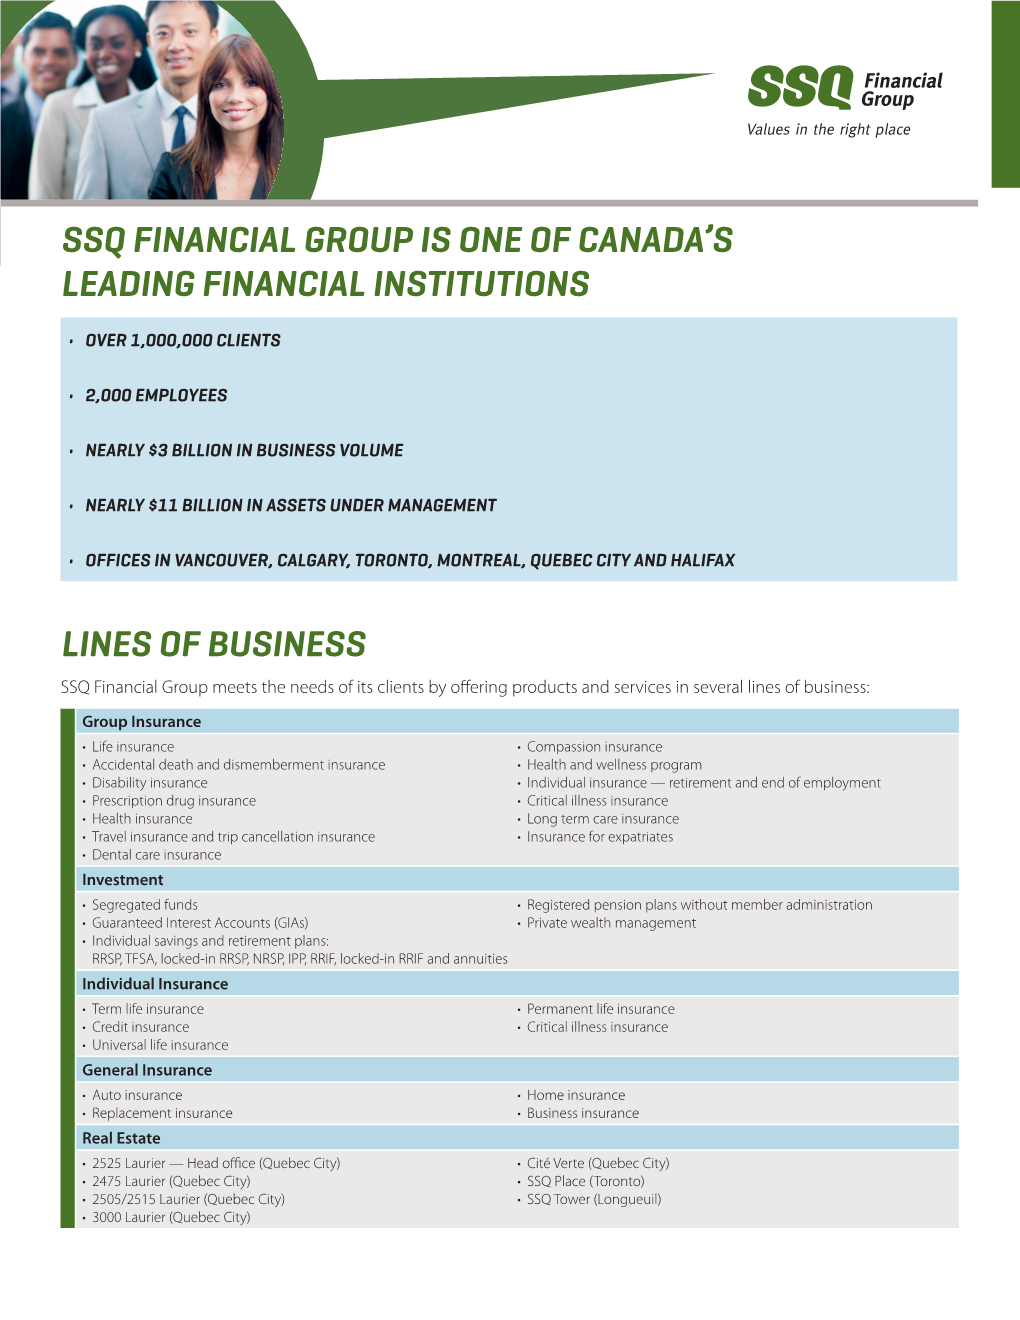 Ssq Financial Group Is One of Canada's Leading Financial